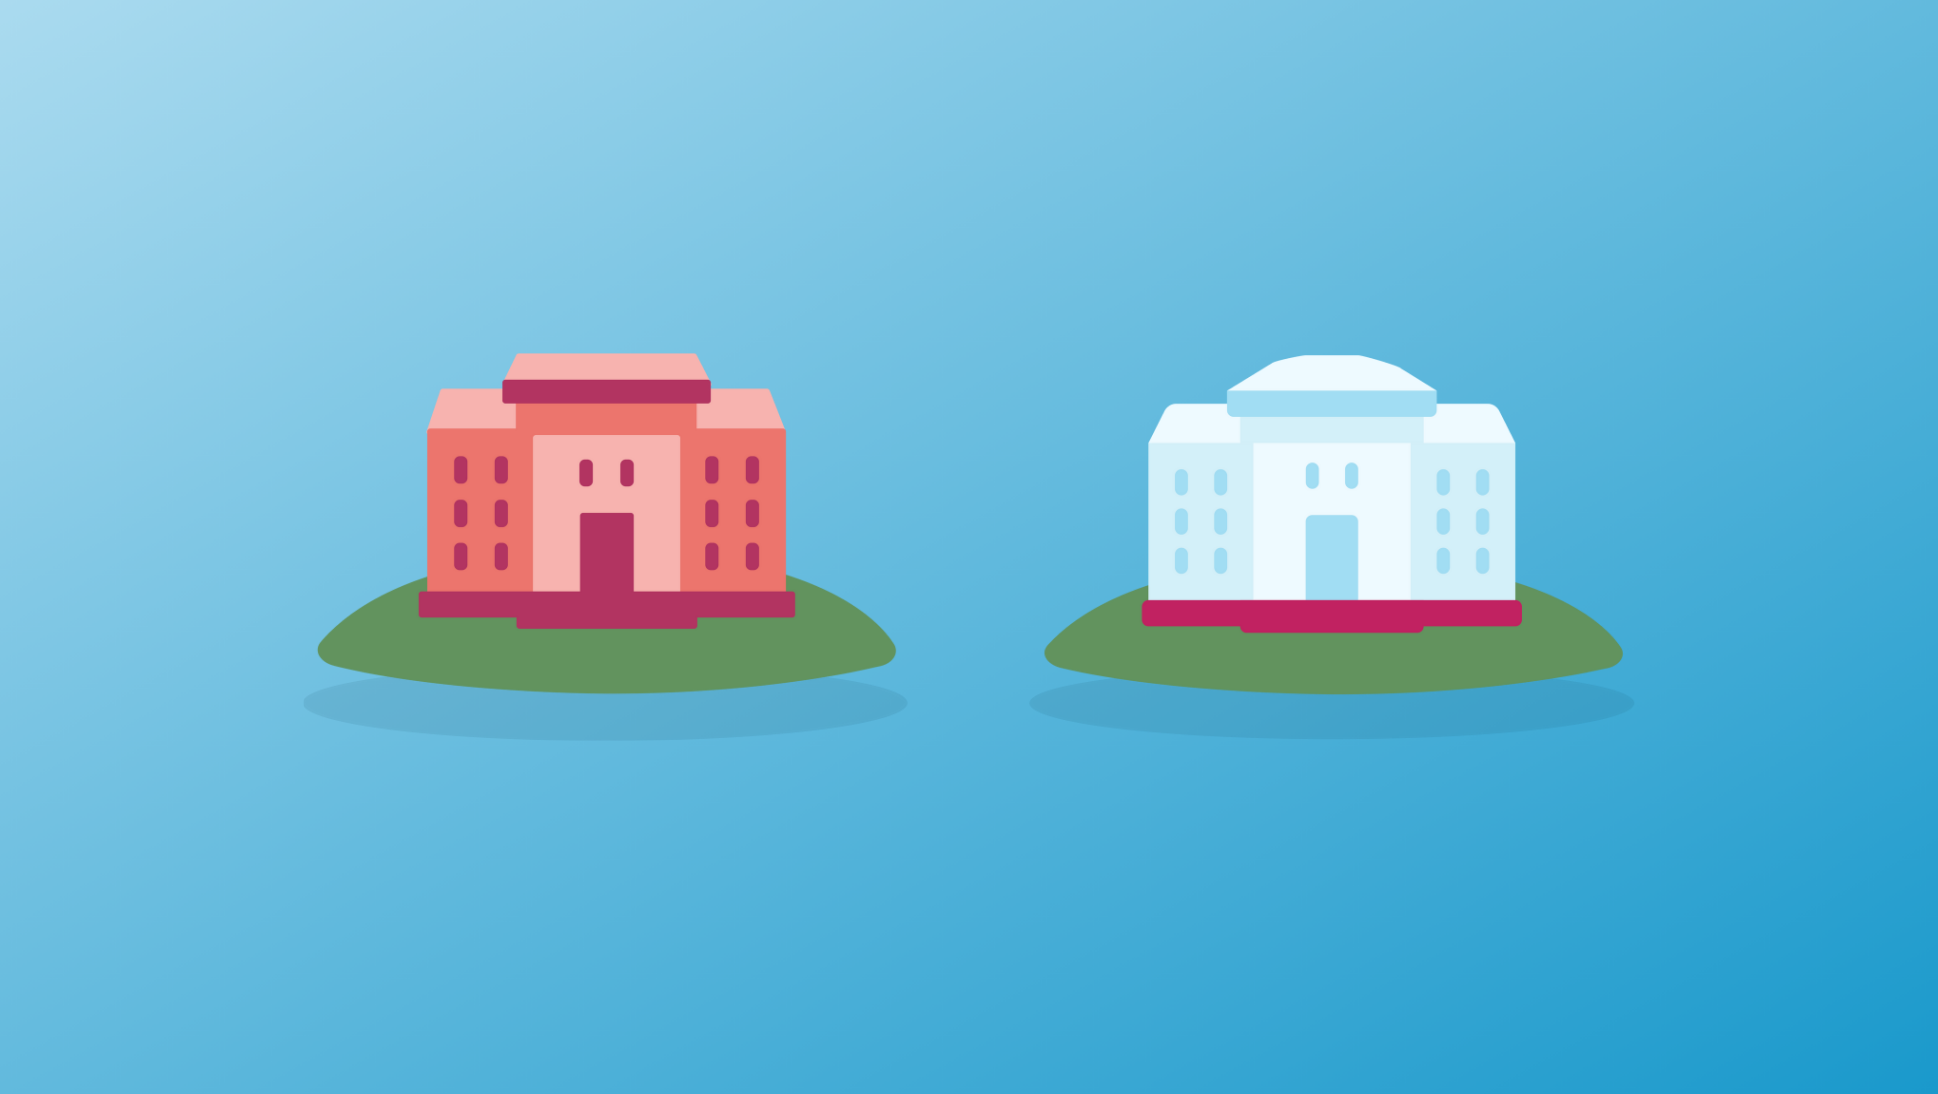 College vs University [And Other Higher Education Institutions] - illustration of a red college and a red college on hills